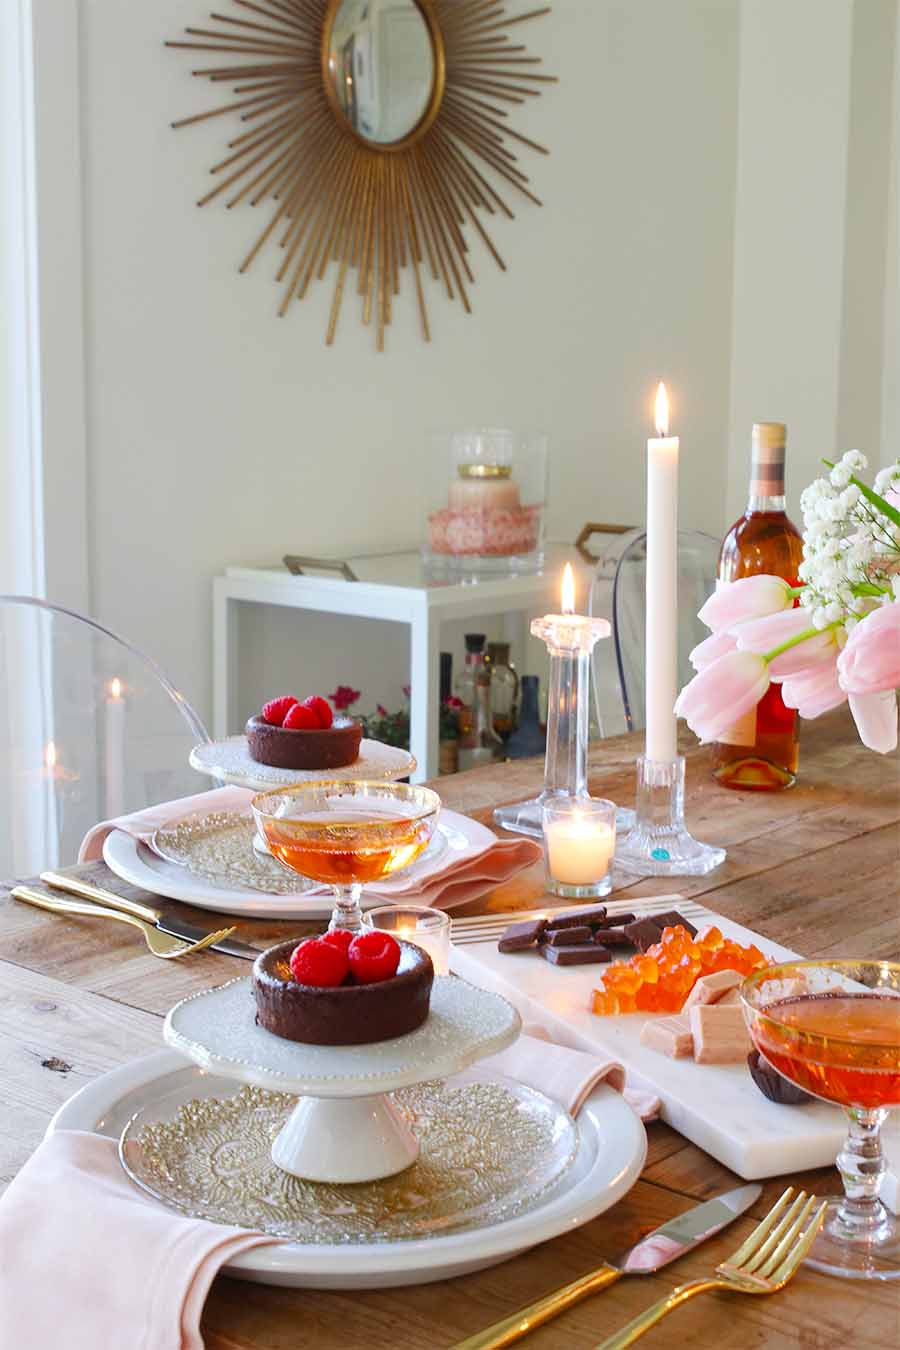 Candle Light Dinner Recipes : 20 Easy Romantic Dinner Ideas At Home For